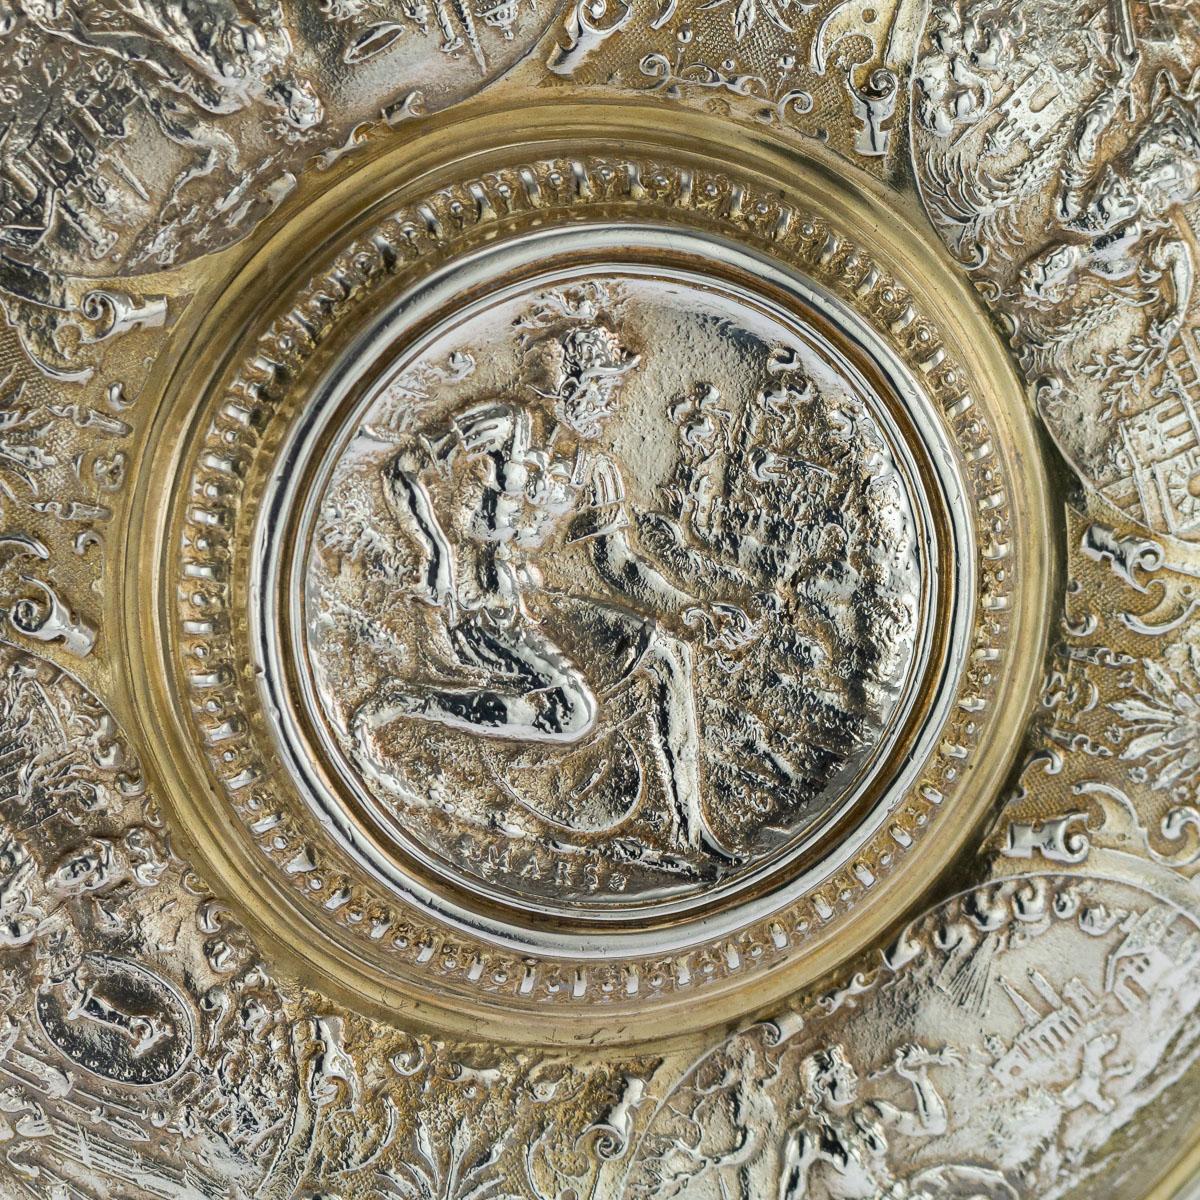 Antique 19th century Victorian rare solid silver wall plaque / sideboard dish, of impressive size and weight, richly part-gilt, the centre plaque with depiction of Mars, surrounded by cartouches bearing personifications of Pax, Abundantia, Bellum